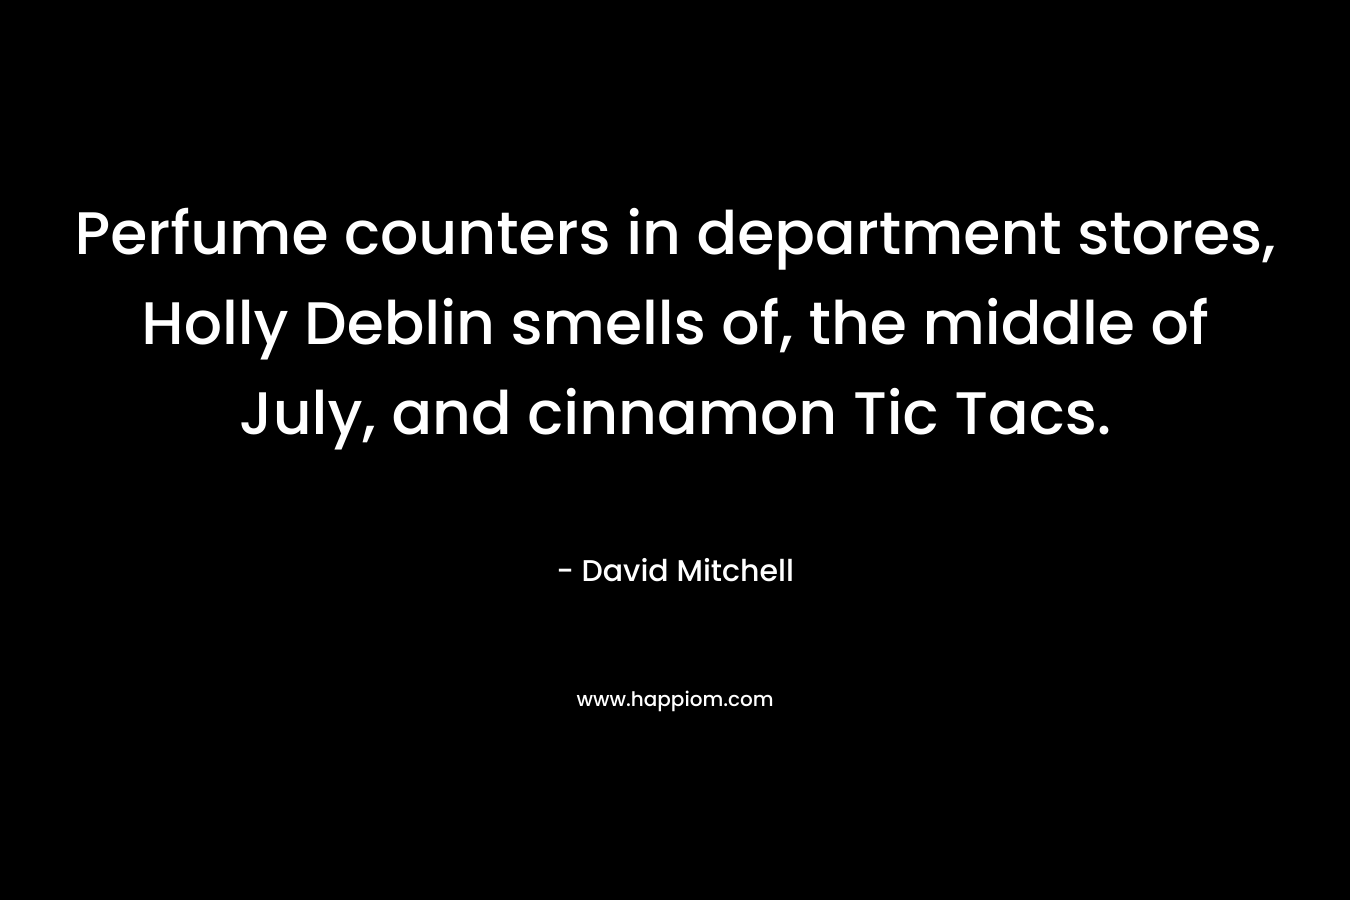 Perfume counters in department stores, Holly Deblin smells of, the middle of July, and cinnamon Tic Tacs. – David Mitchell